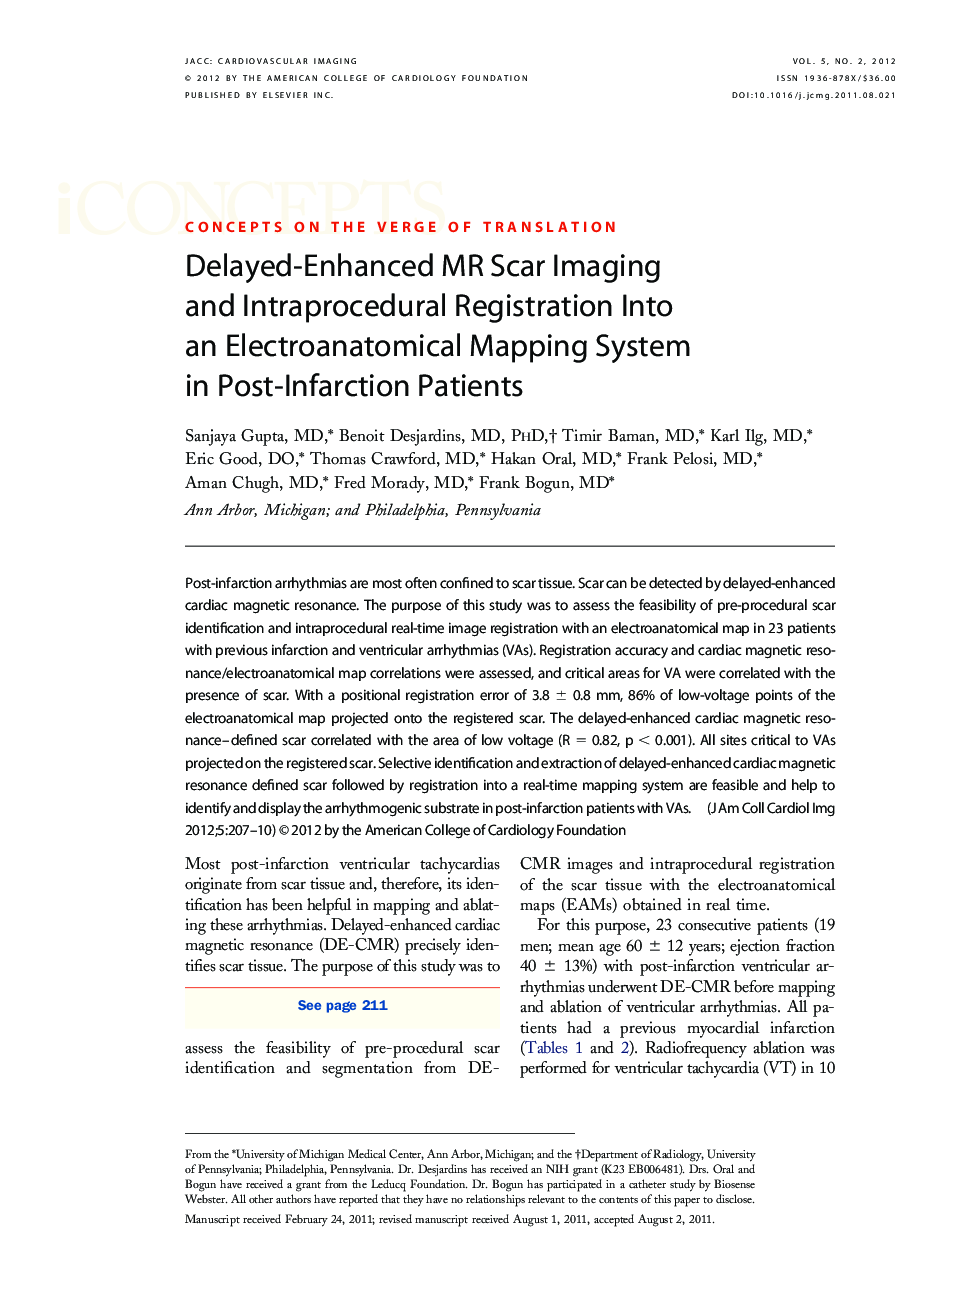 Delayed-Enhanced MR Scar Imaging and Intraprocedural Registration Into an Electroanatomical Mapping System in Post-Infarction Patients 